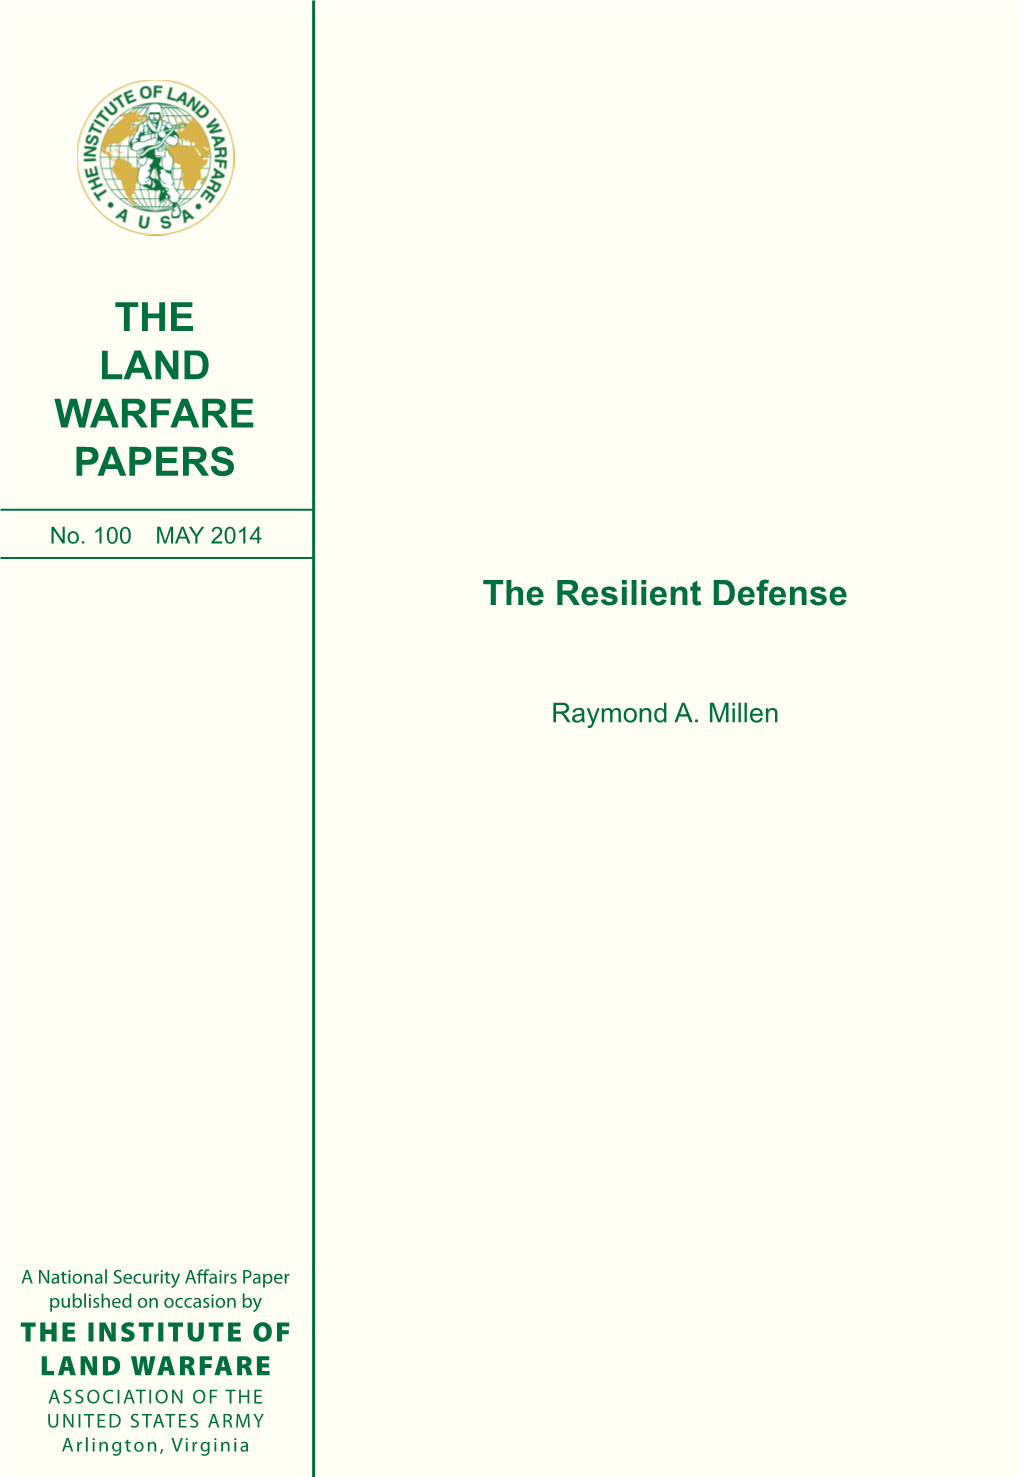 The Resilient Defense